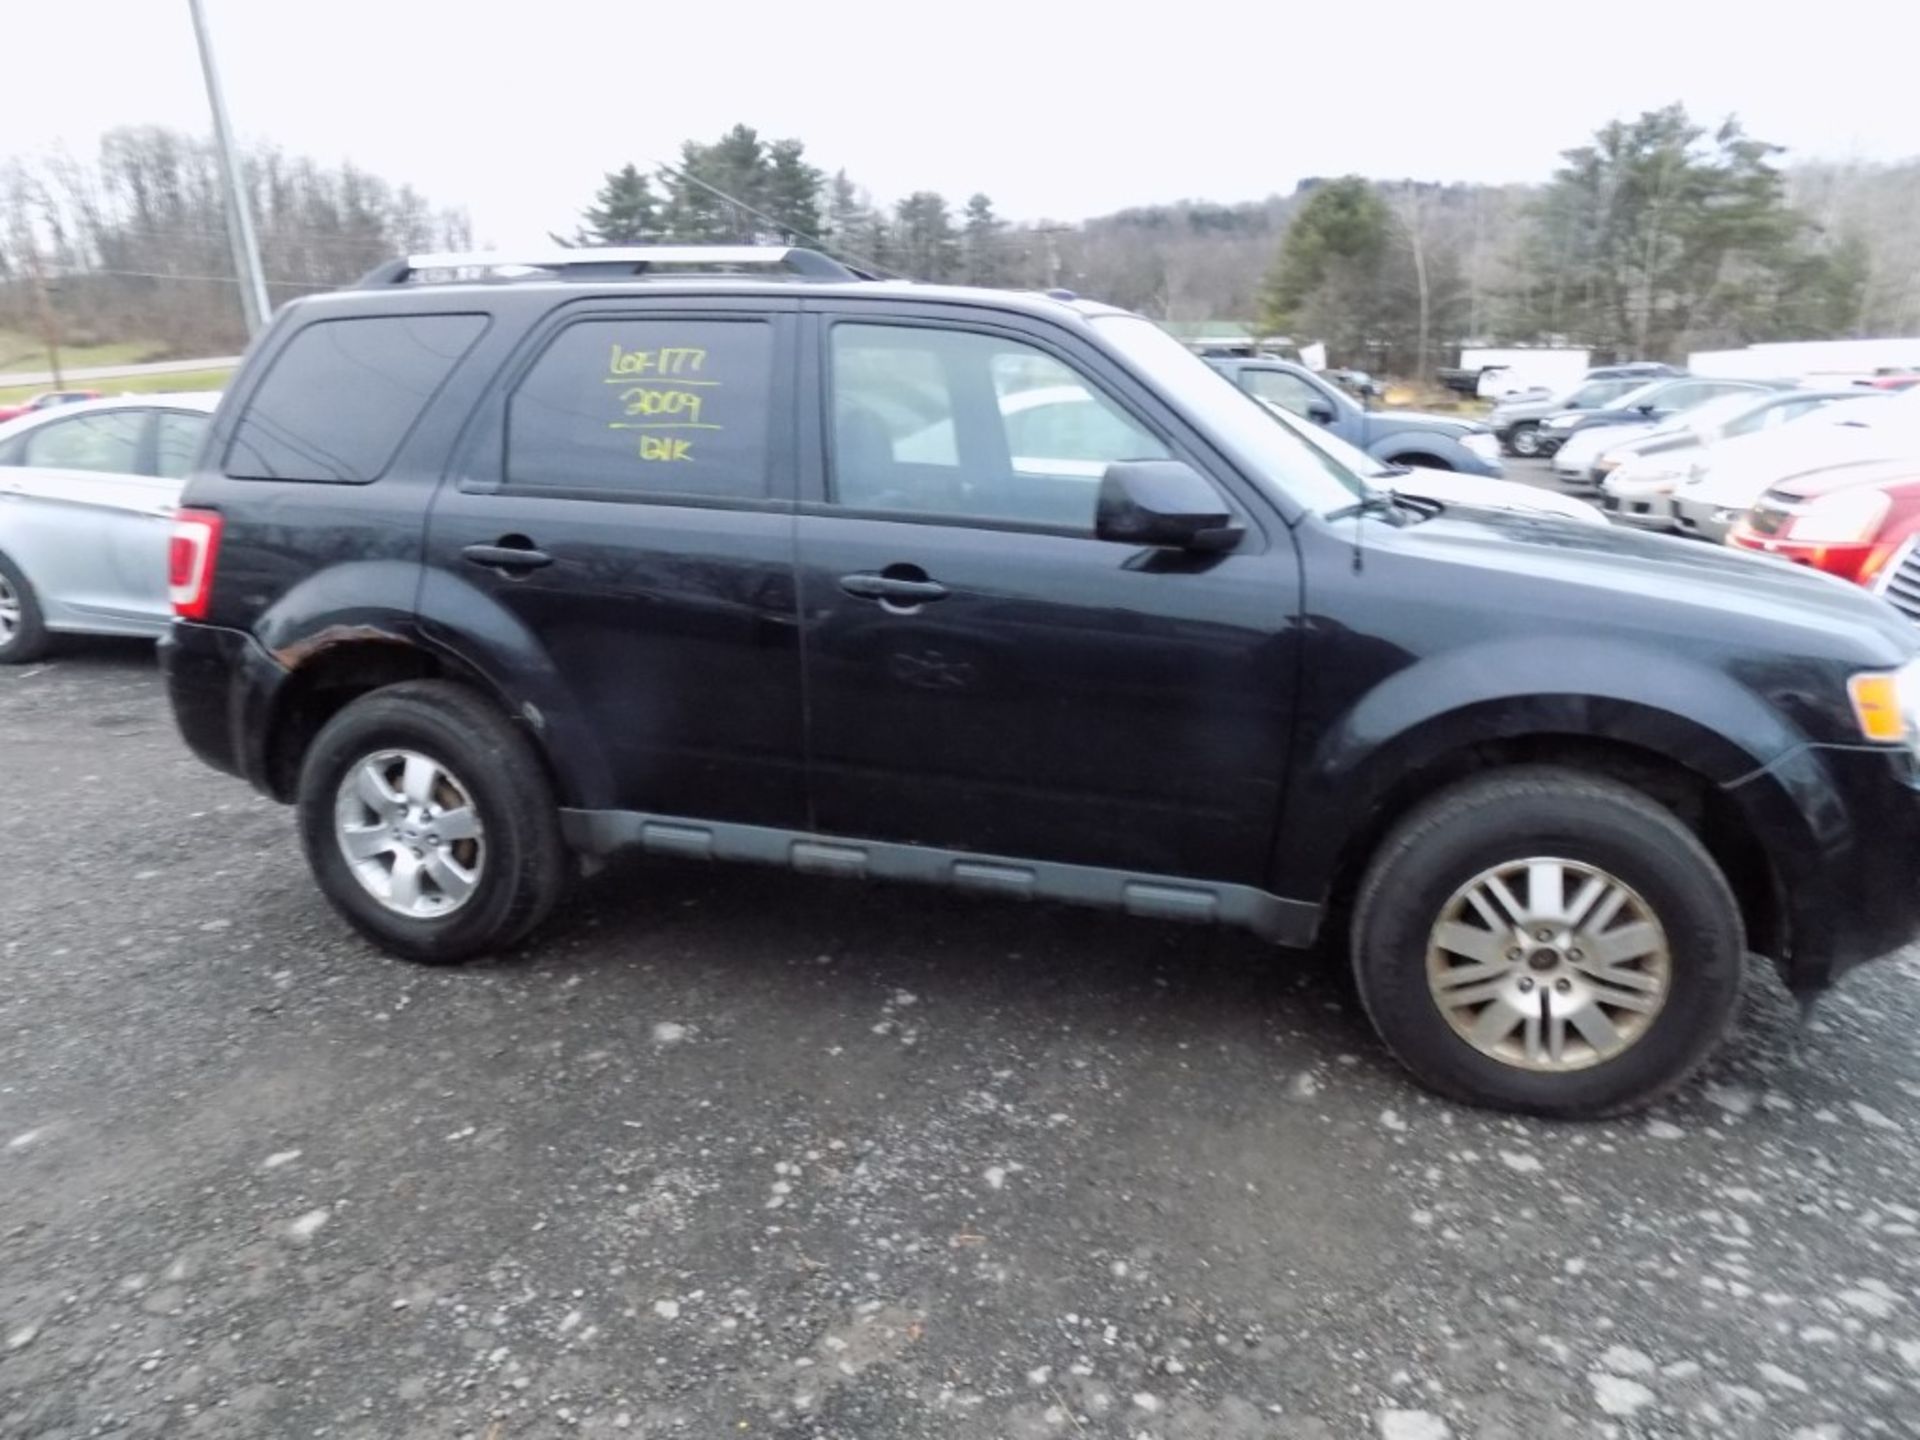 2009 Ford Escape Limited, 4x4, Black, Leather, Sunroof, 121,531 Miles, VIN#: 1FMCU94G09KC66421, - Image 5 of 12